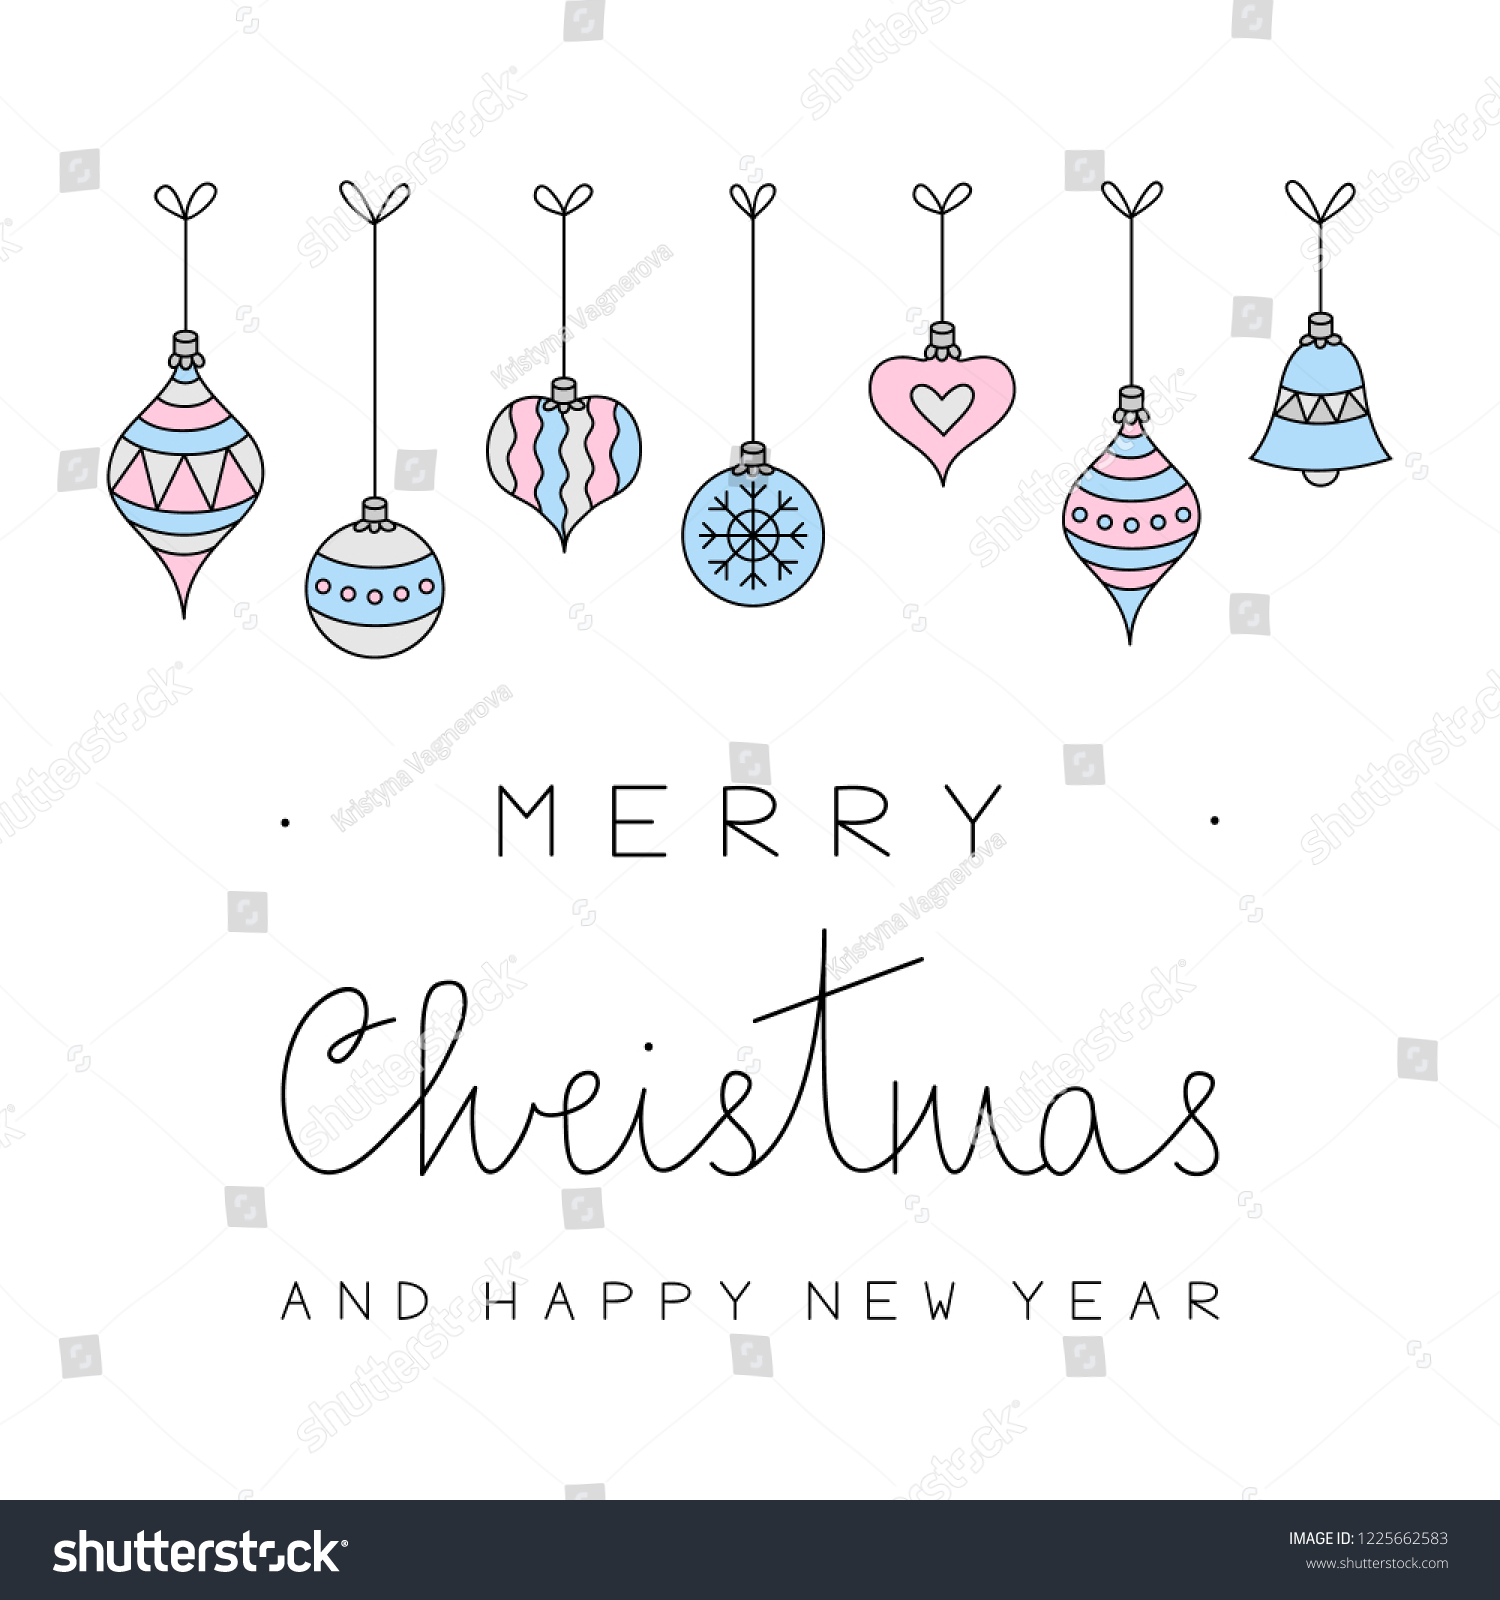 Merry Christmas Happy New Year Vector Stock Vector (Royalty Free